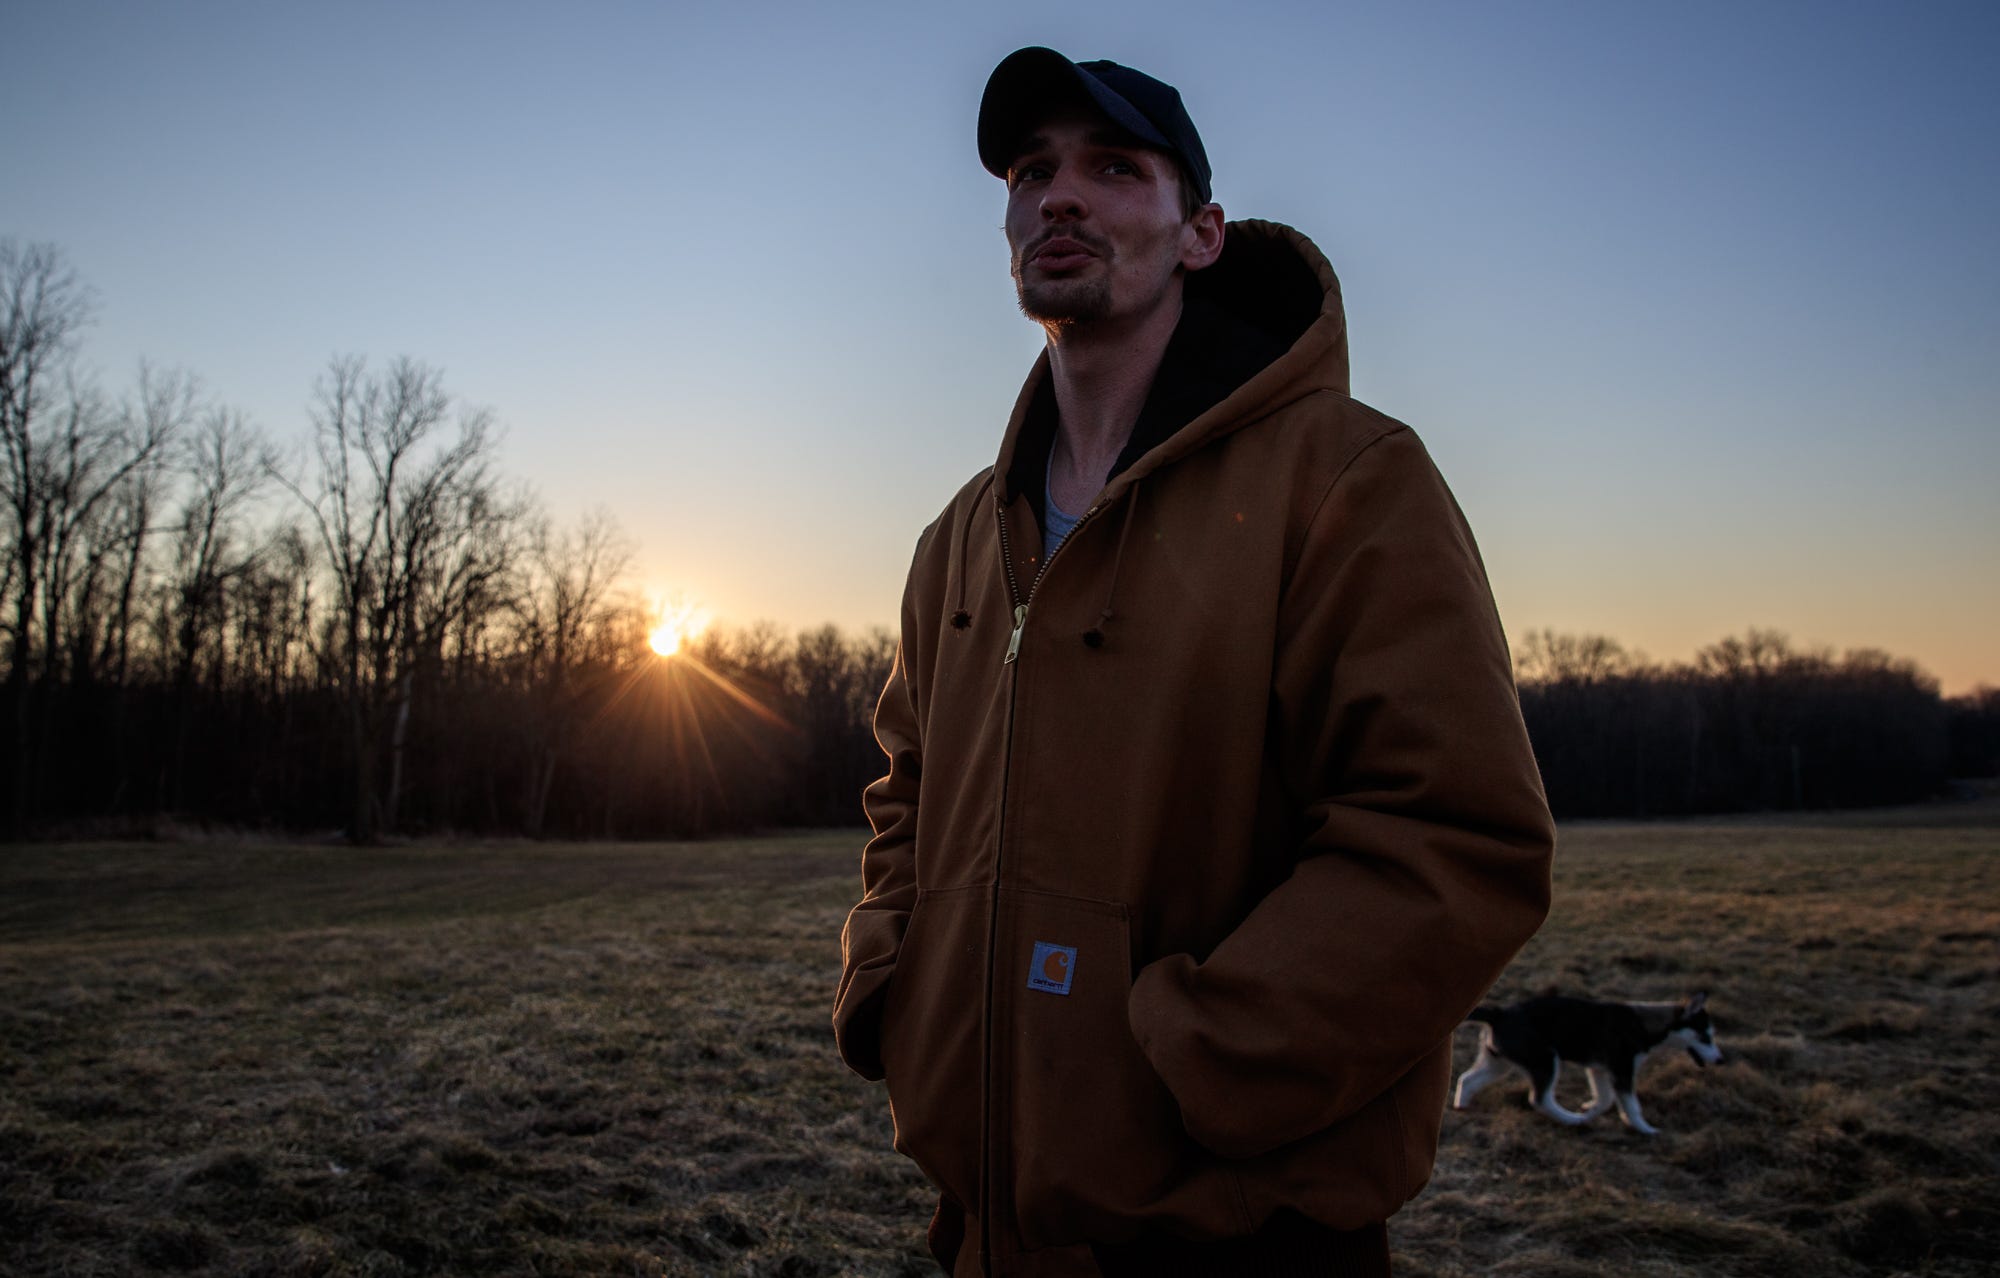 Tanner McAfee walks through a field with his dog, Meeka, behind the home he recently purchased in Michigan. He's proud of the home for which he spent 10 years saving. The RV industry was good for pay, he says, but bad for his body. McAfee left the industry for a while earlier this year, saying he doesn't want to pay for a knee replacement before he's 40. "I just started working with my buddies who've been trying to get me to work with them for a year now," he said. "It's not as much money but I don't have to kill myself everyday."